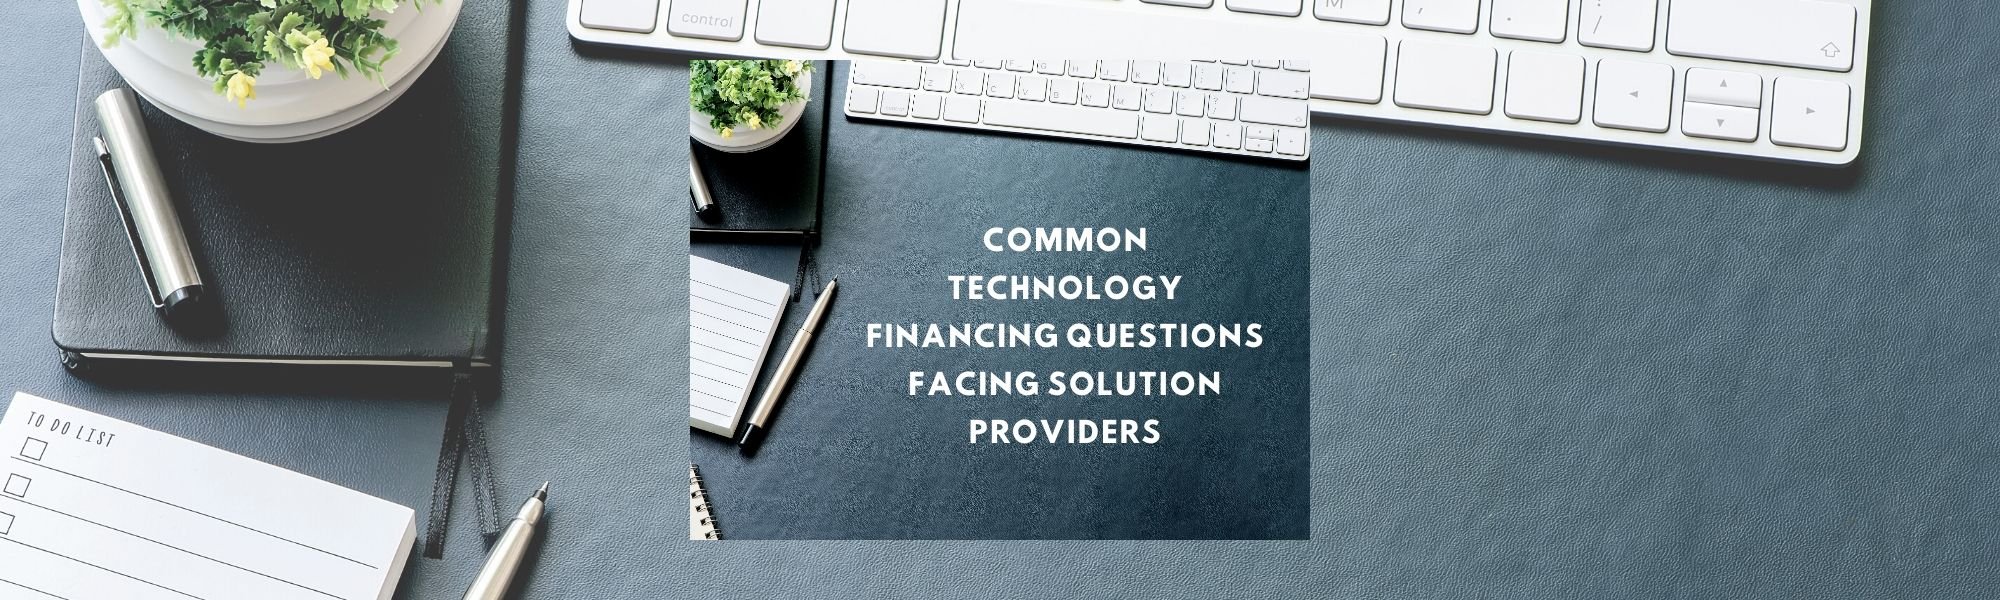 VLOG: Common Technology Financing Questions Facing Solution Providers